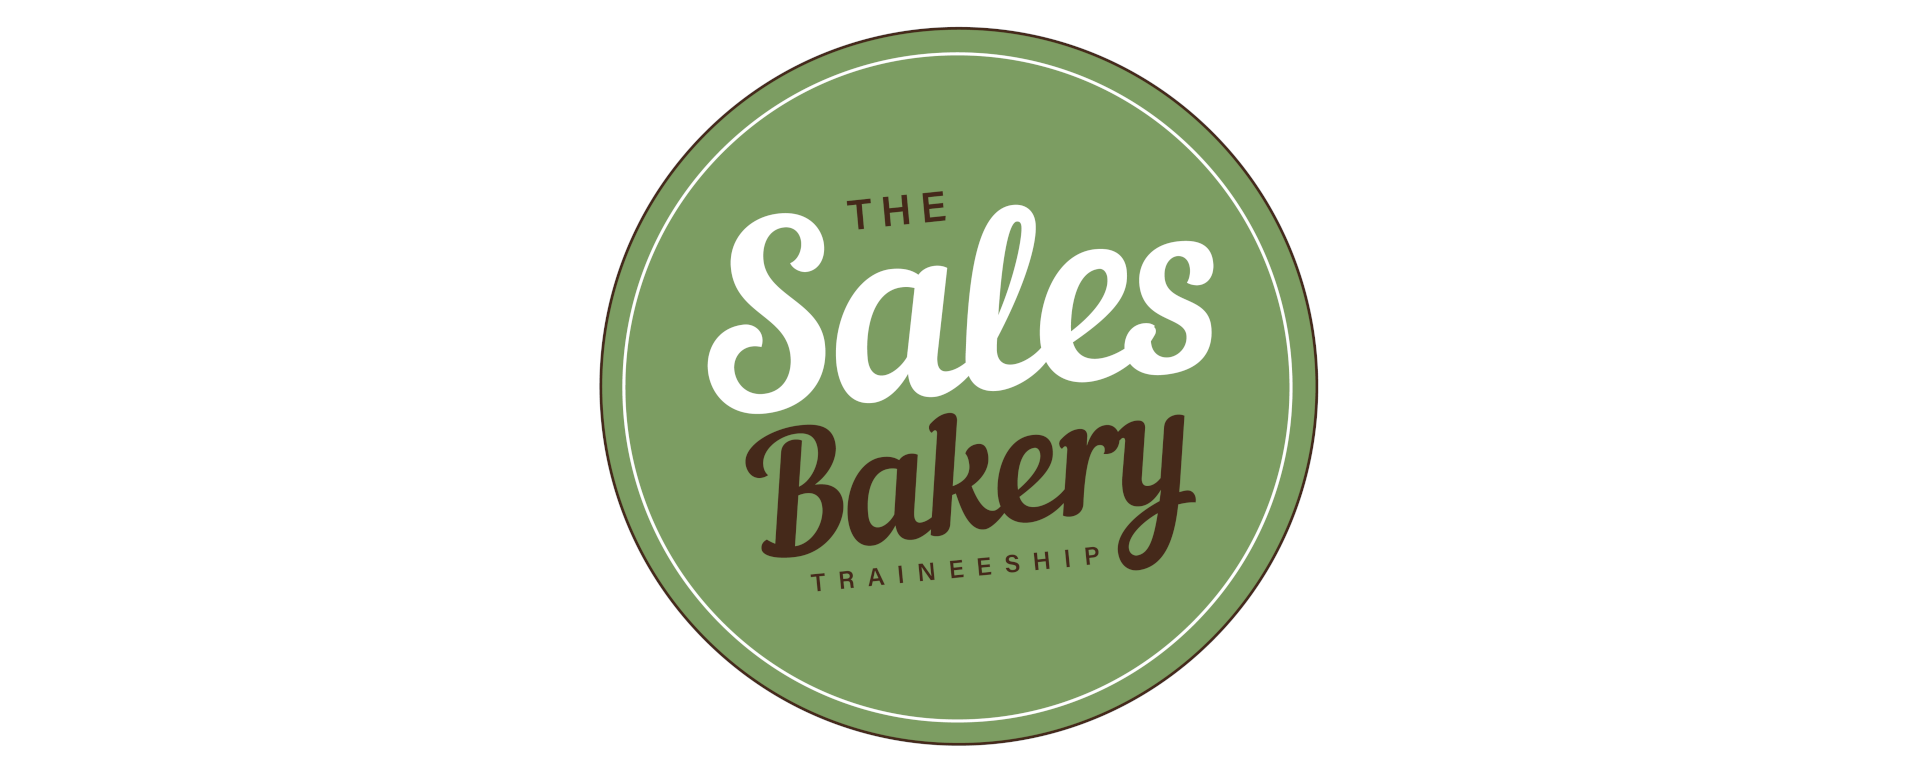 The Sales Bakery